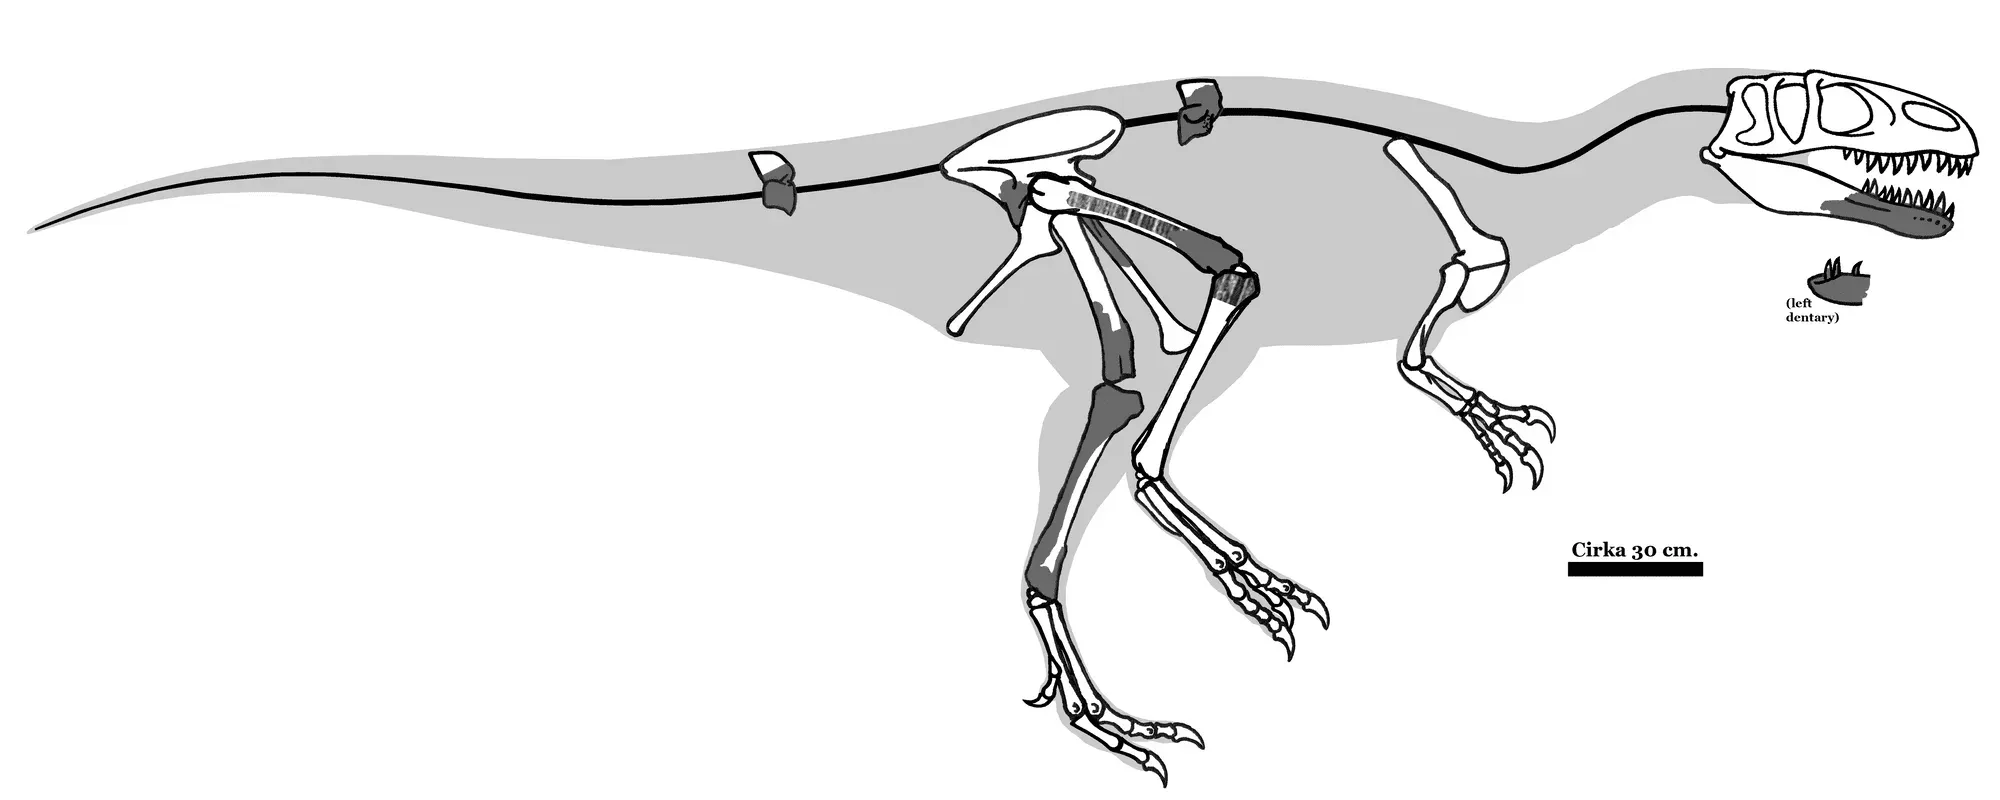 Magnosaurus facts help to learn about a new species of dinosaurs.